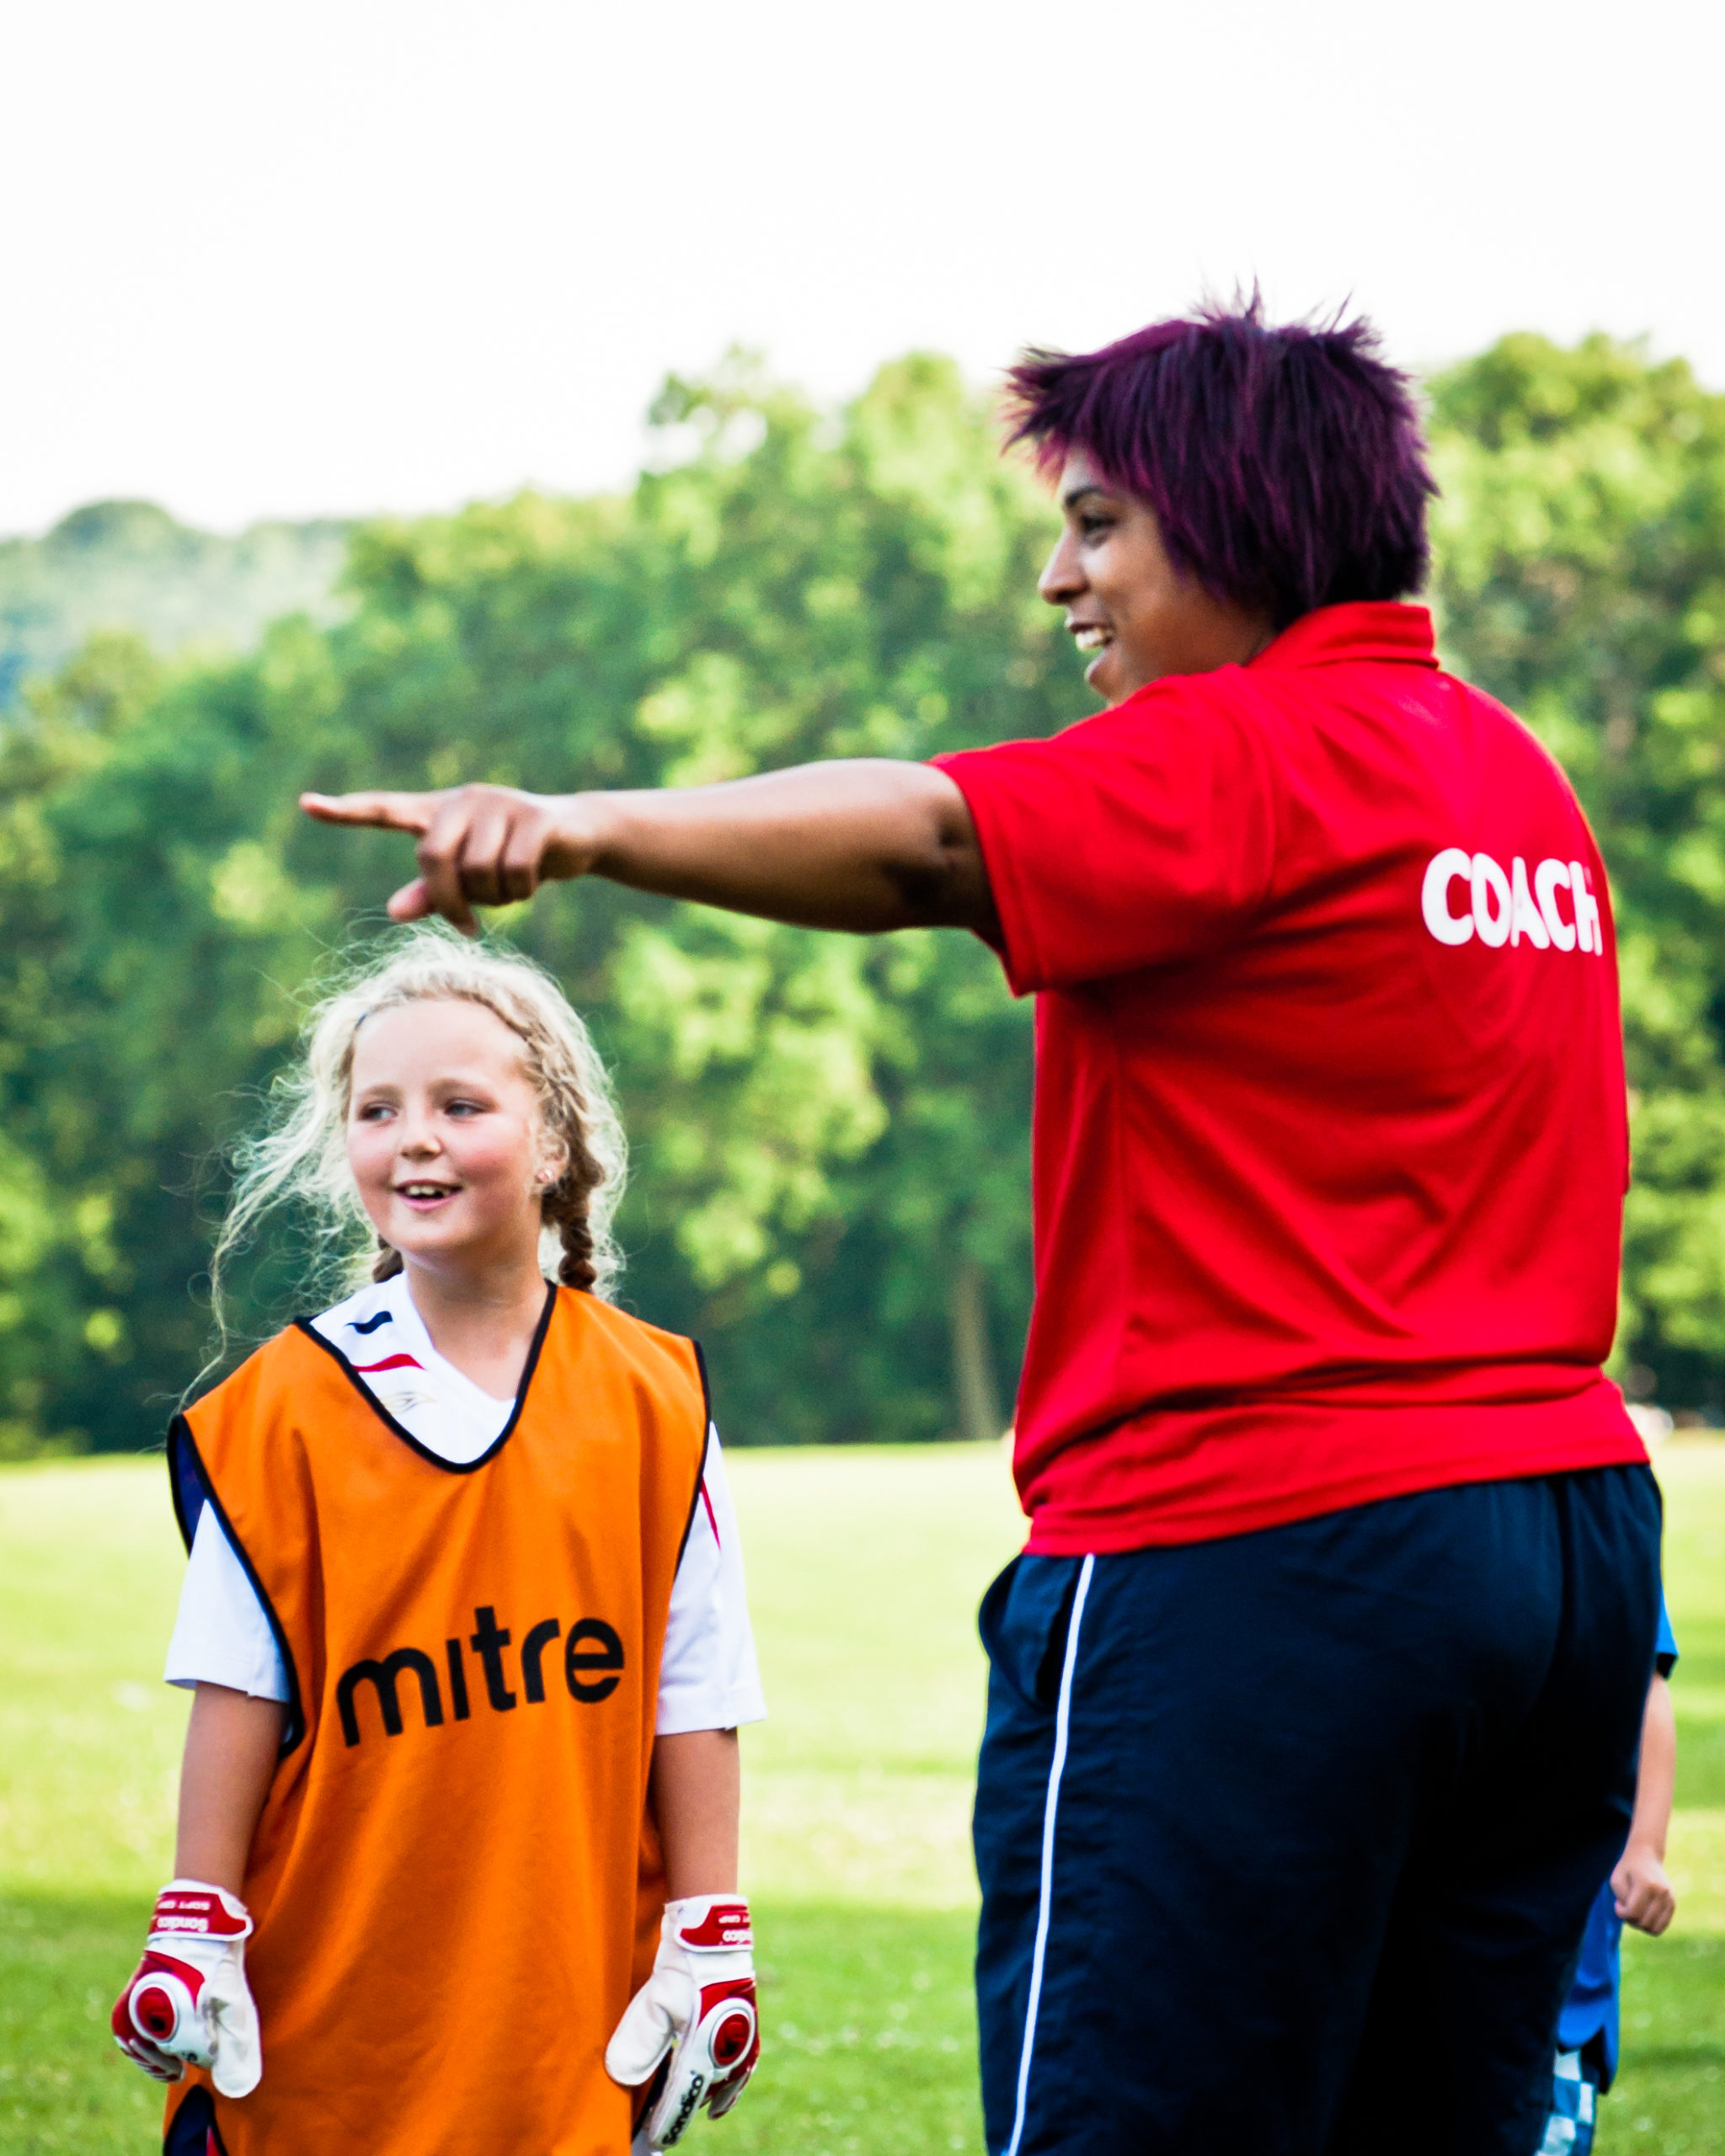 Tackling racism in community sport – it’s time to act!